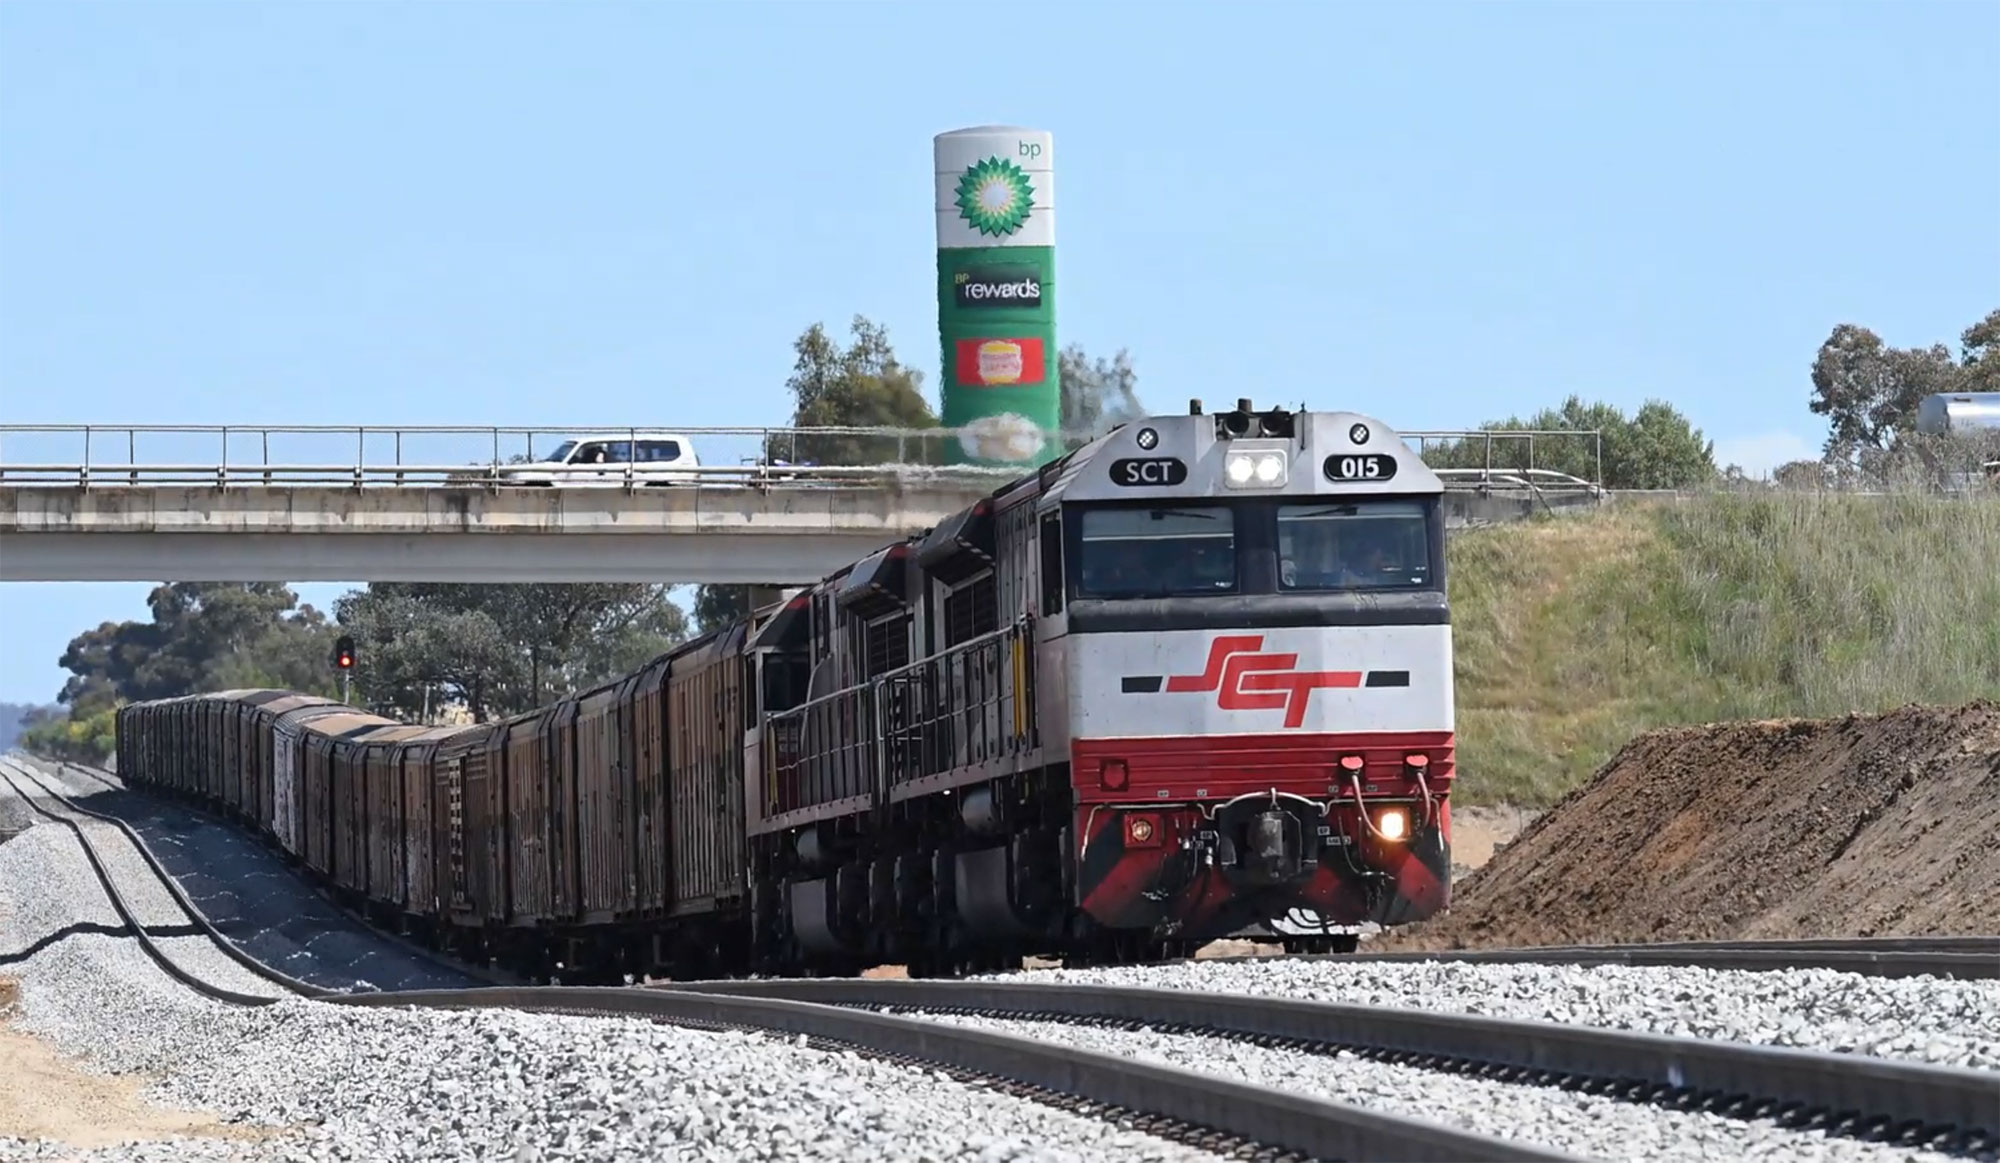 There’s plenty of clearance under the Murray Valley Highway for double-stacked trains now the track lower has been completed